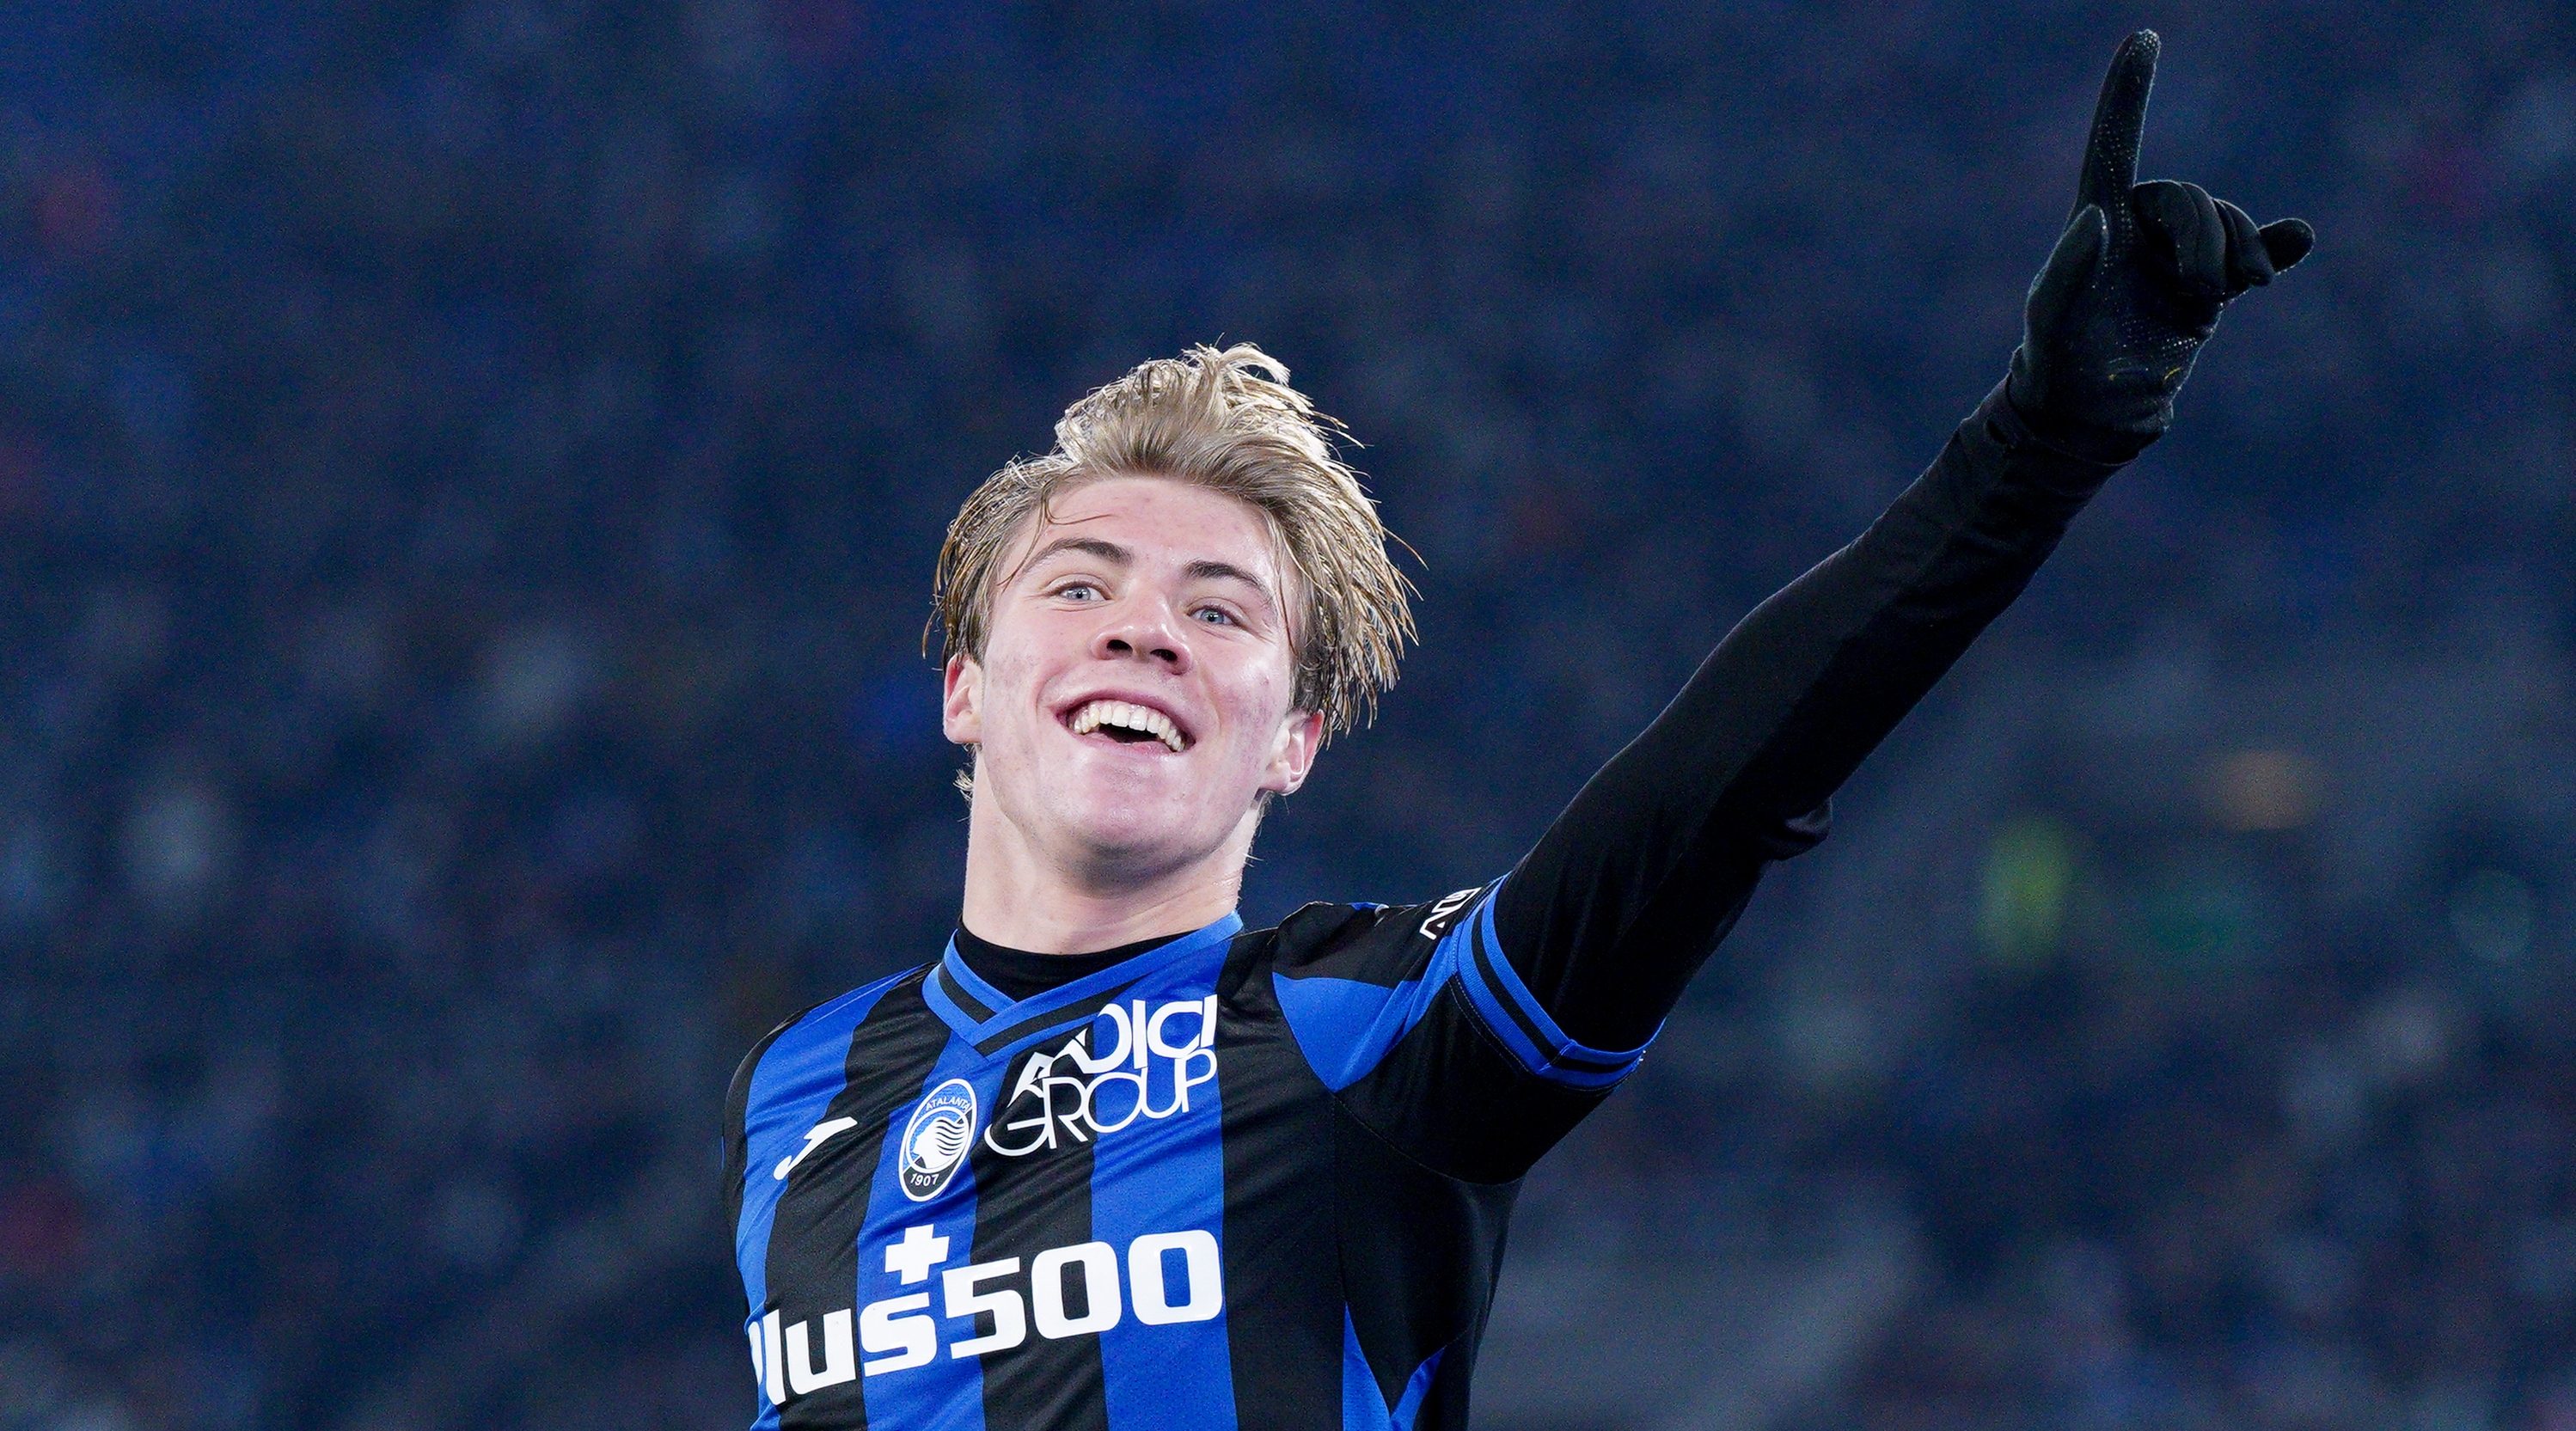 Rasmus Hojlund of Atalanta celebrates after scoring his team's second goal during the Serie A match between Lazio and Atalanta at the Stadio Olimpico on 11 February, 2023 in Rome, Italy.